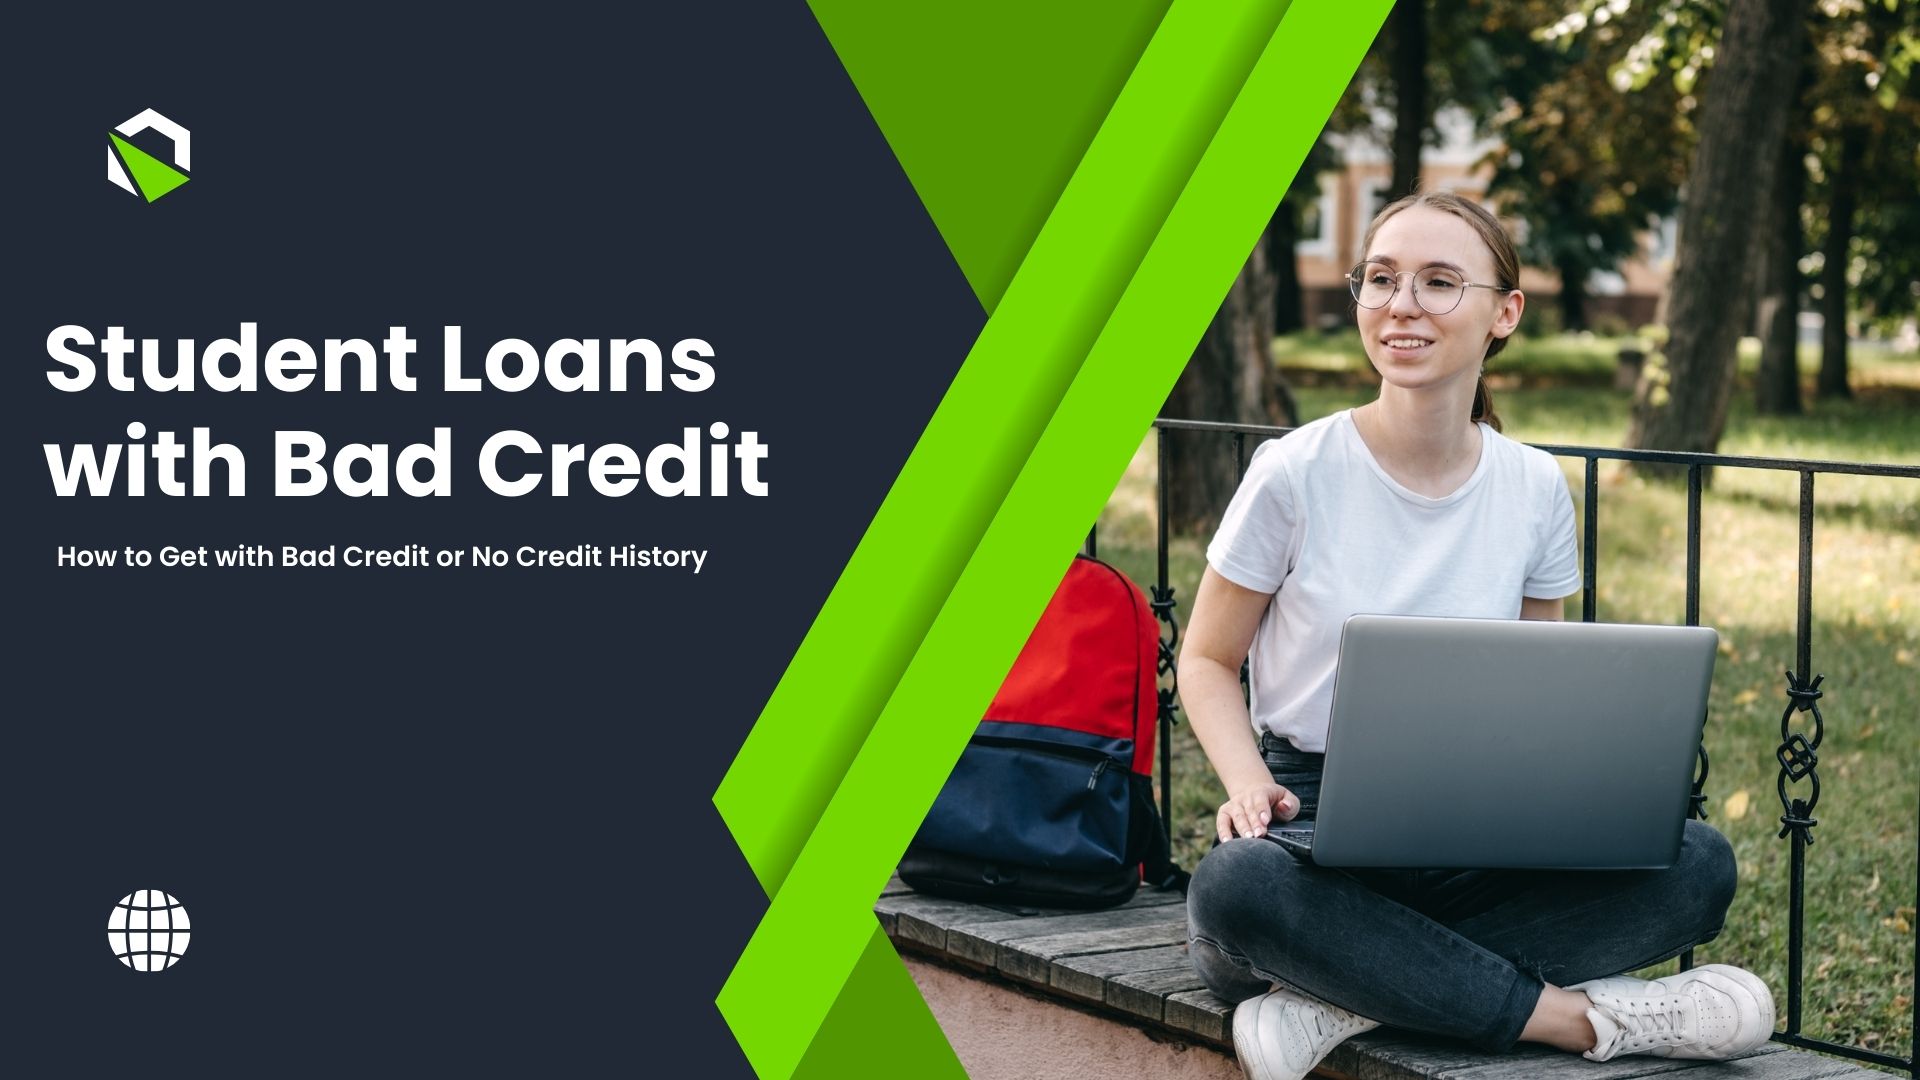 How to Get Student Loans with Bad Credit or No Credit History